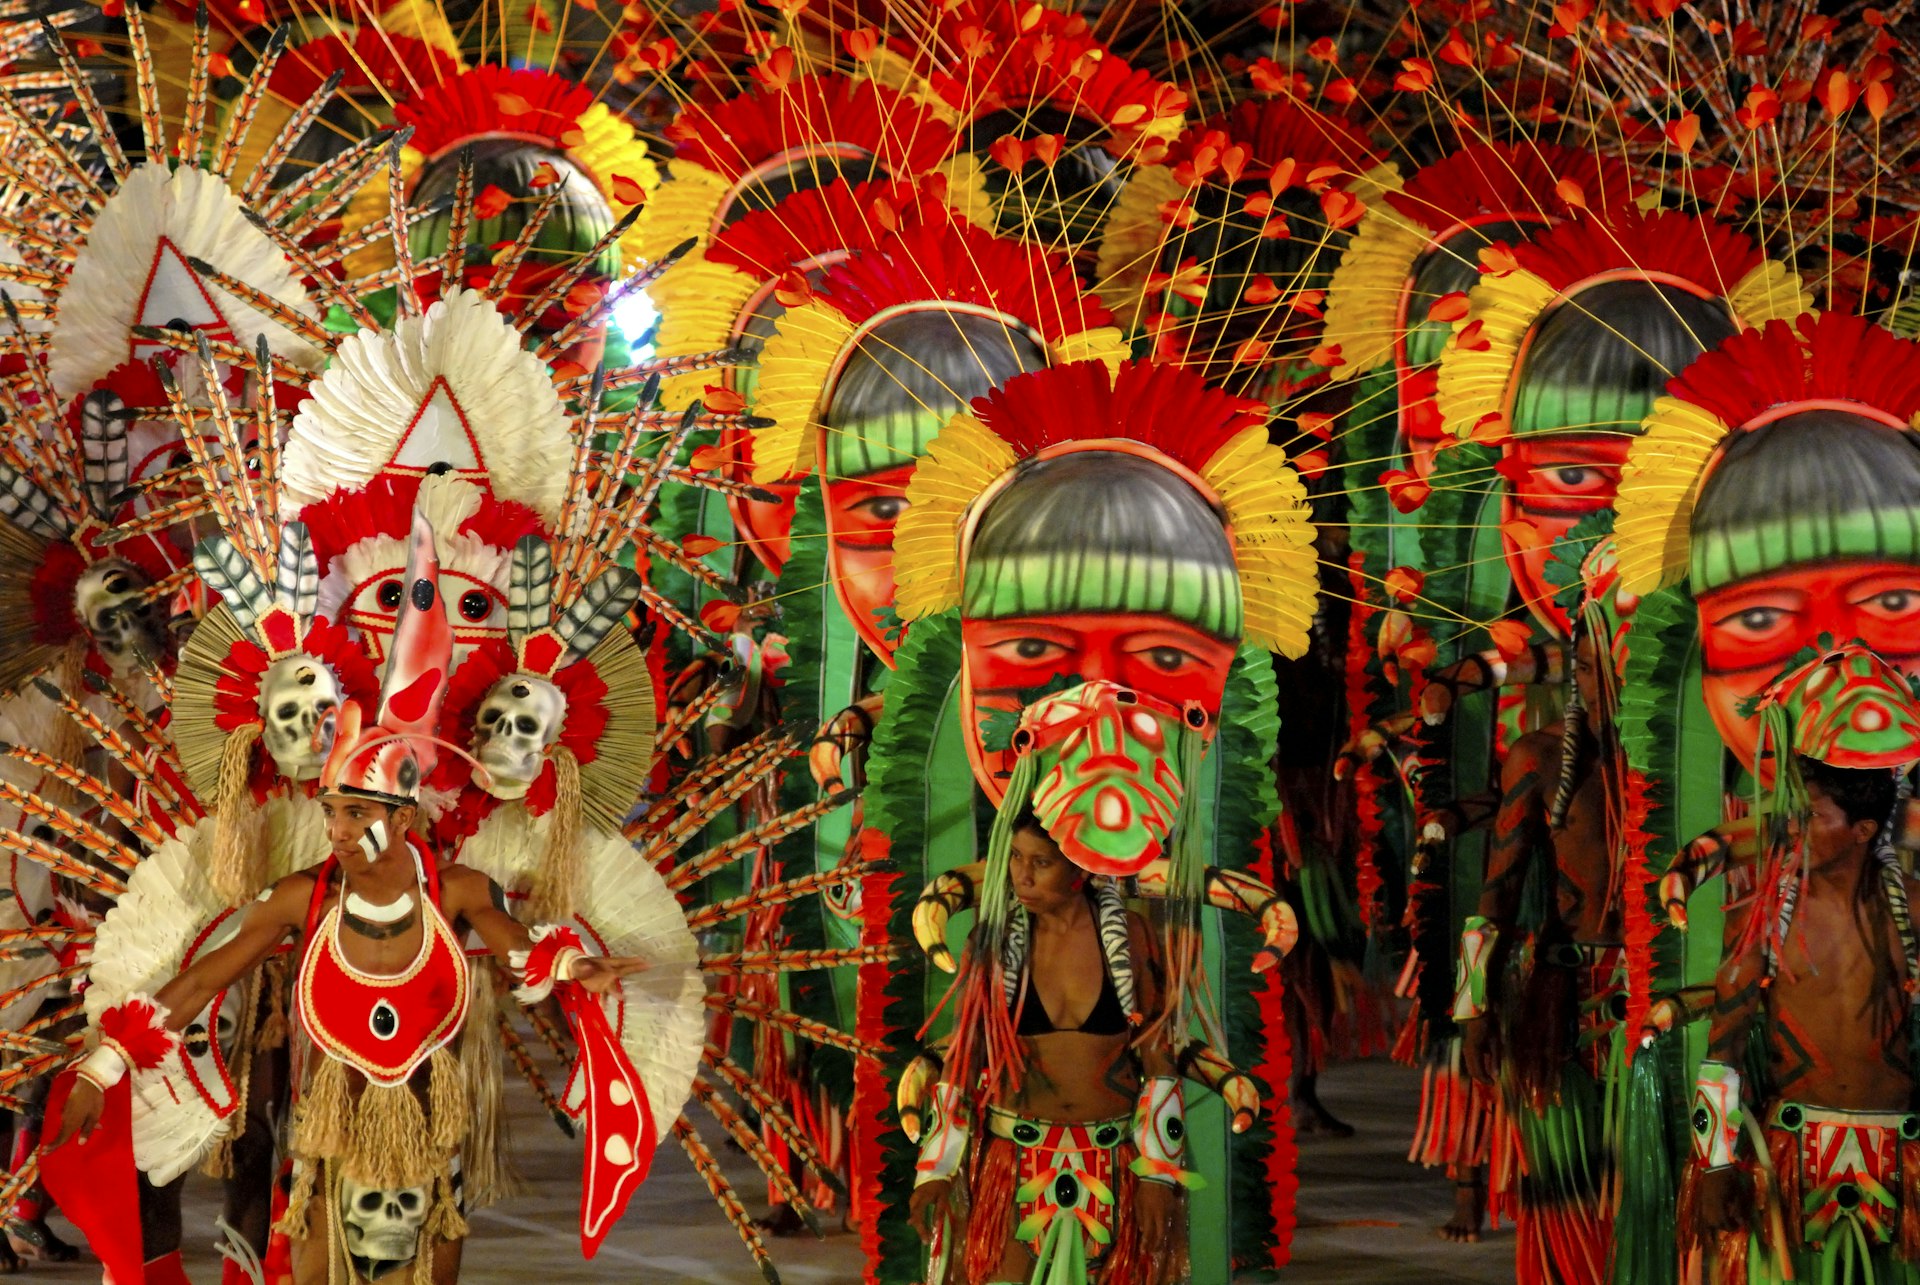 Costumed performers at Boi Bumba, Brazil's largest folklore festival